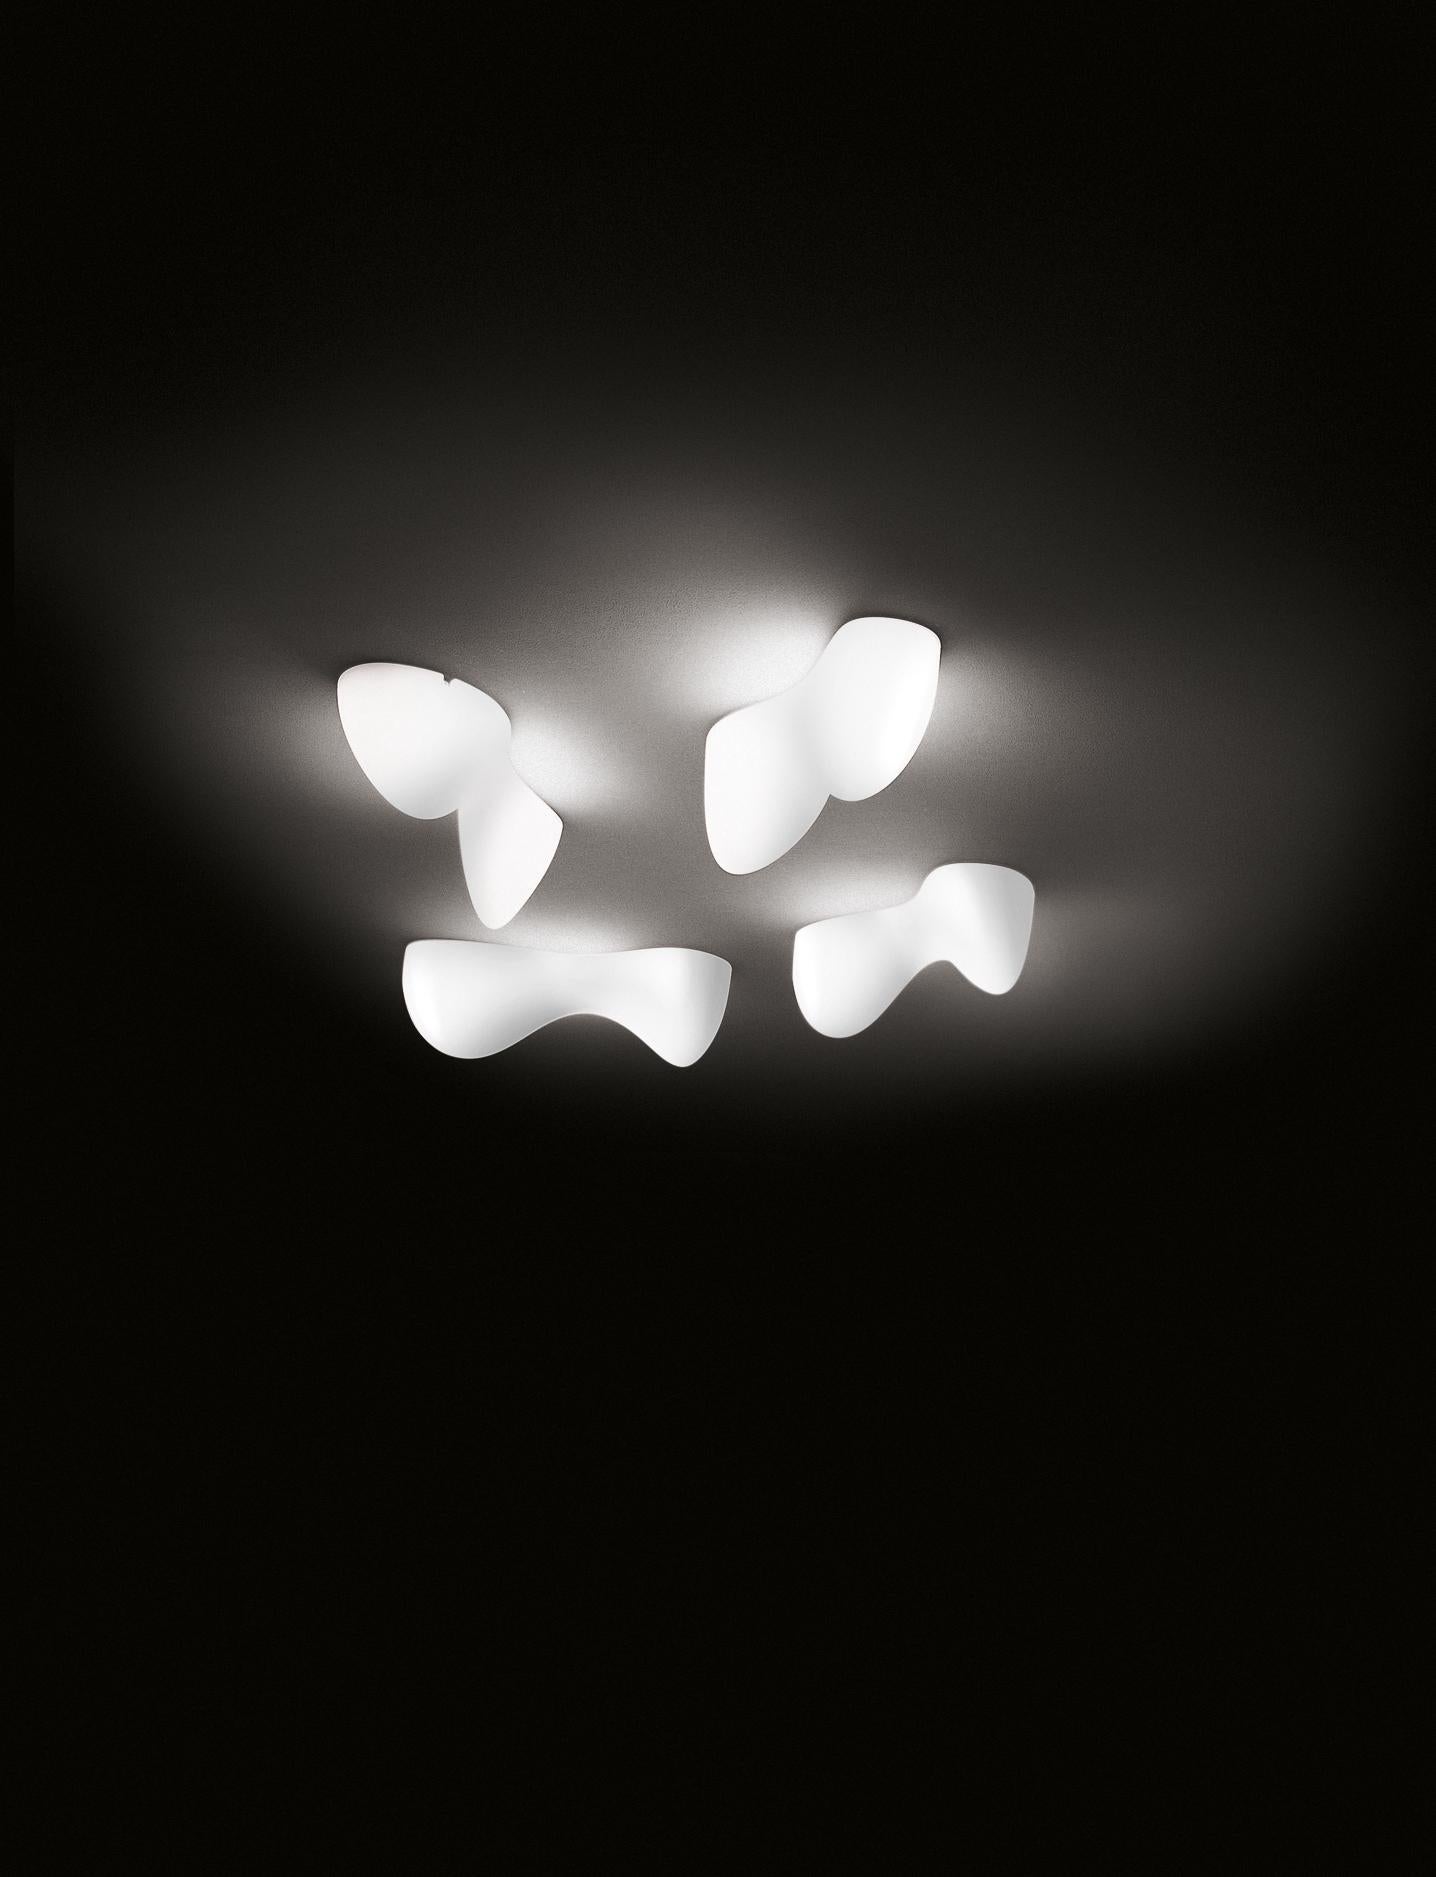 The Blob S wall lamp has the perfect design to create multiple, creative wall compositions.

Materials:
Rotational molded polyethylene and varnished metal.

Light source:
LED Fluo 1 x 24W 2Gx11.

Color:
White.